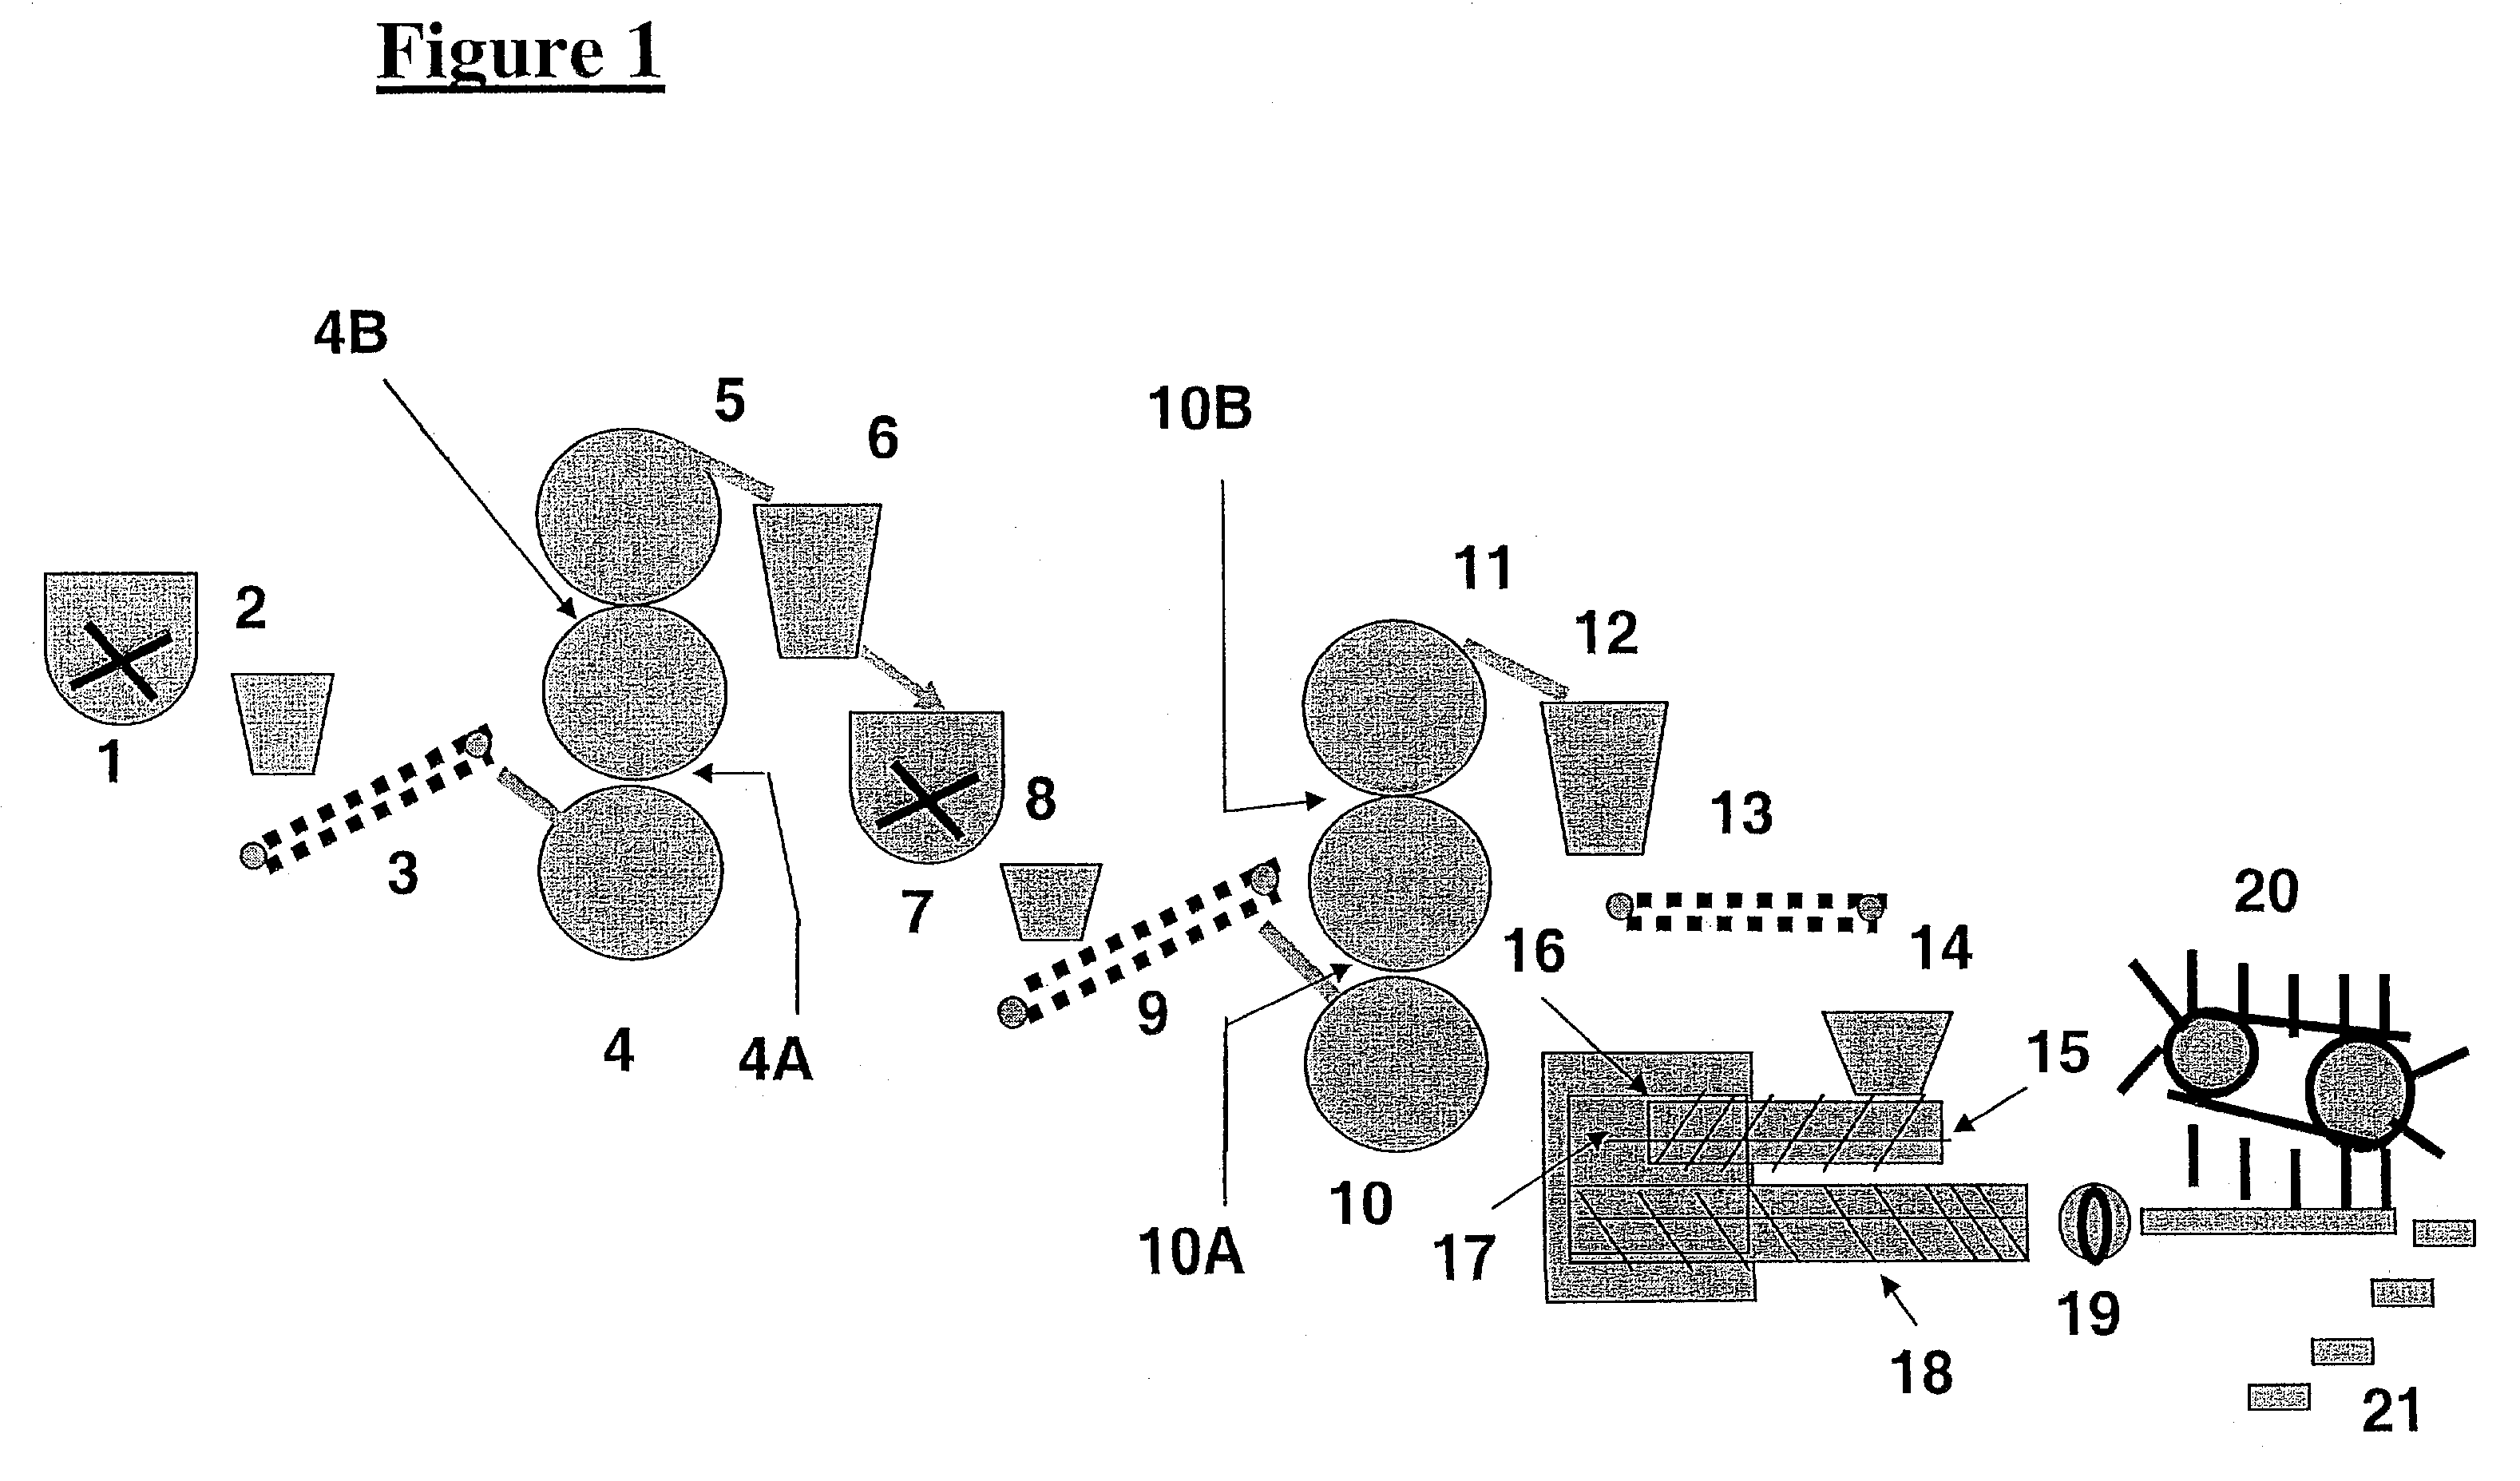 Extruded stick product and method for making same